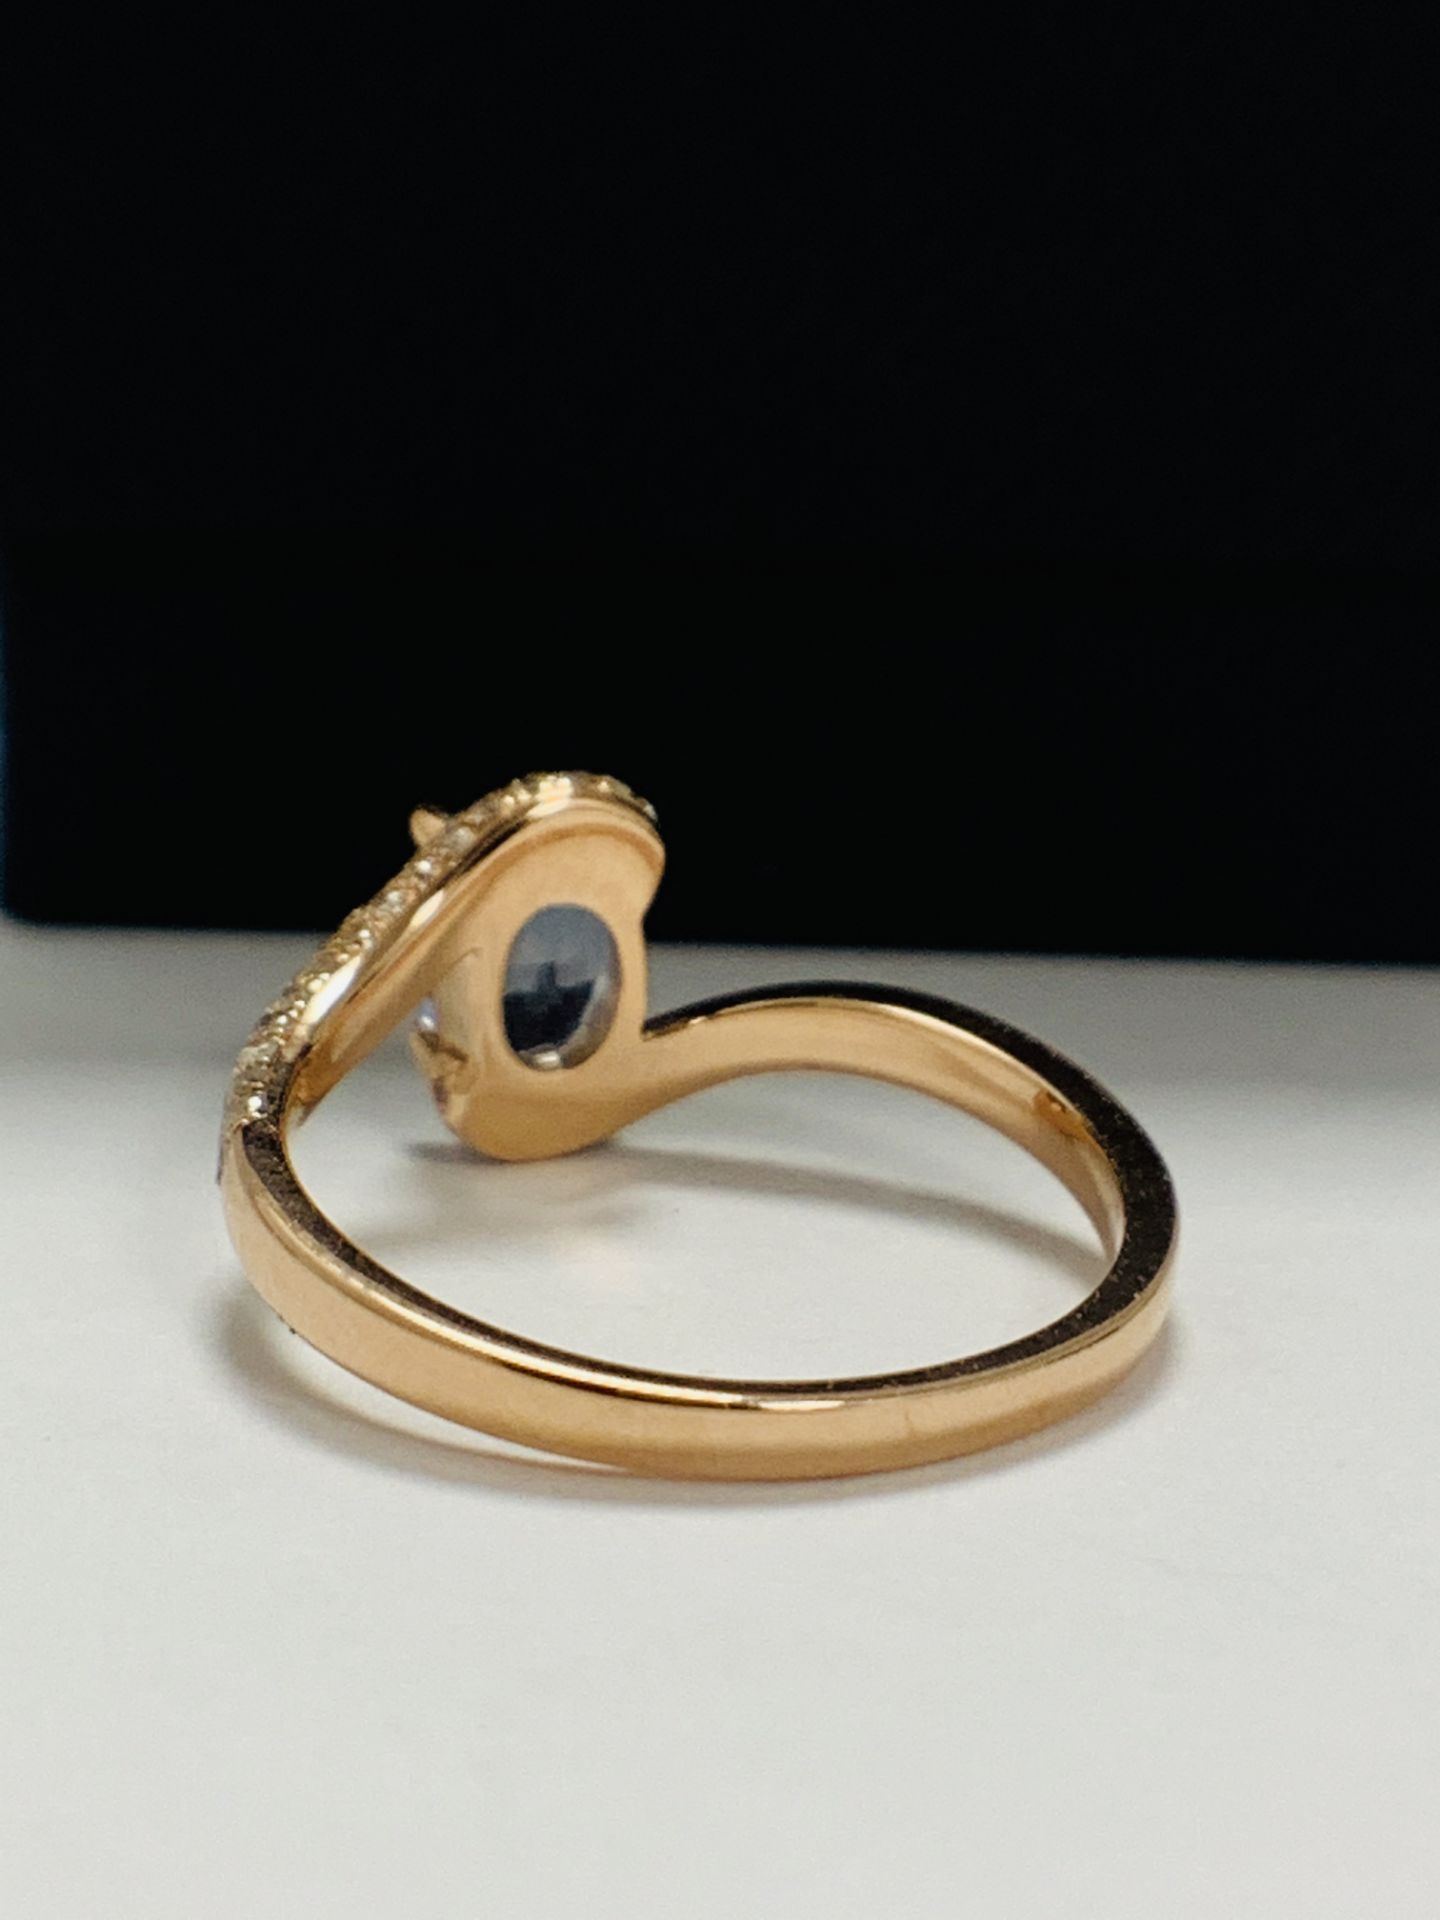 14ct Rose Gold Sapphire and Diamond Ring - Image 5 of 13